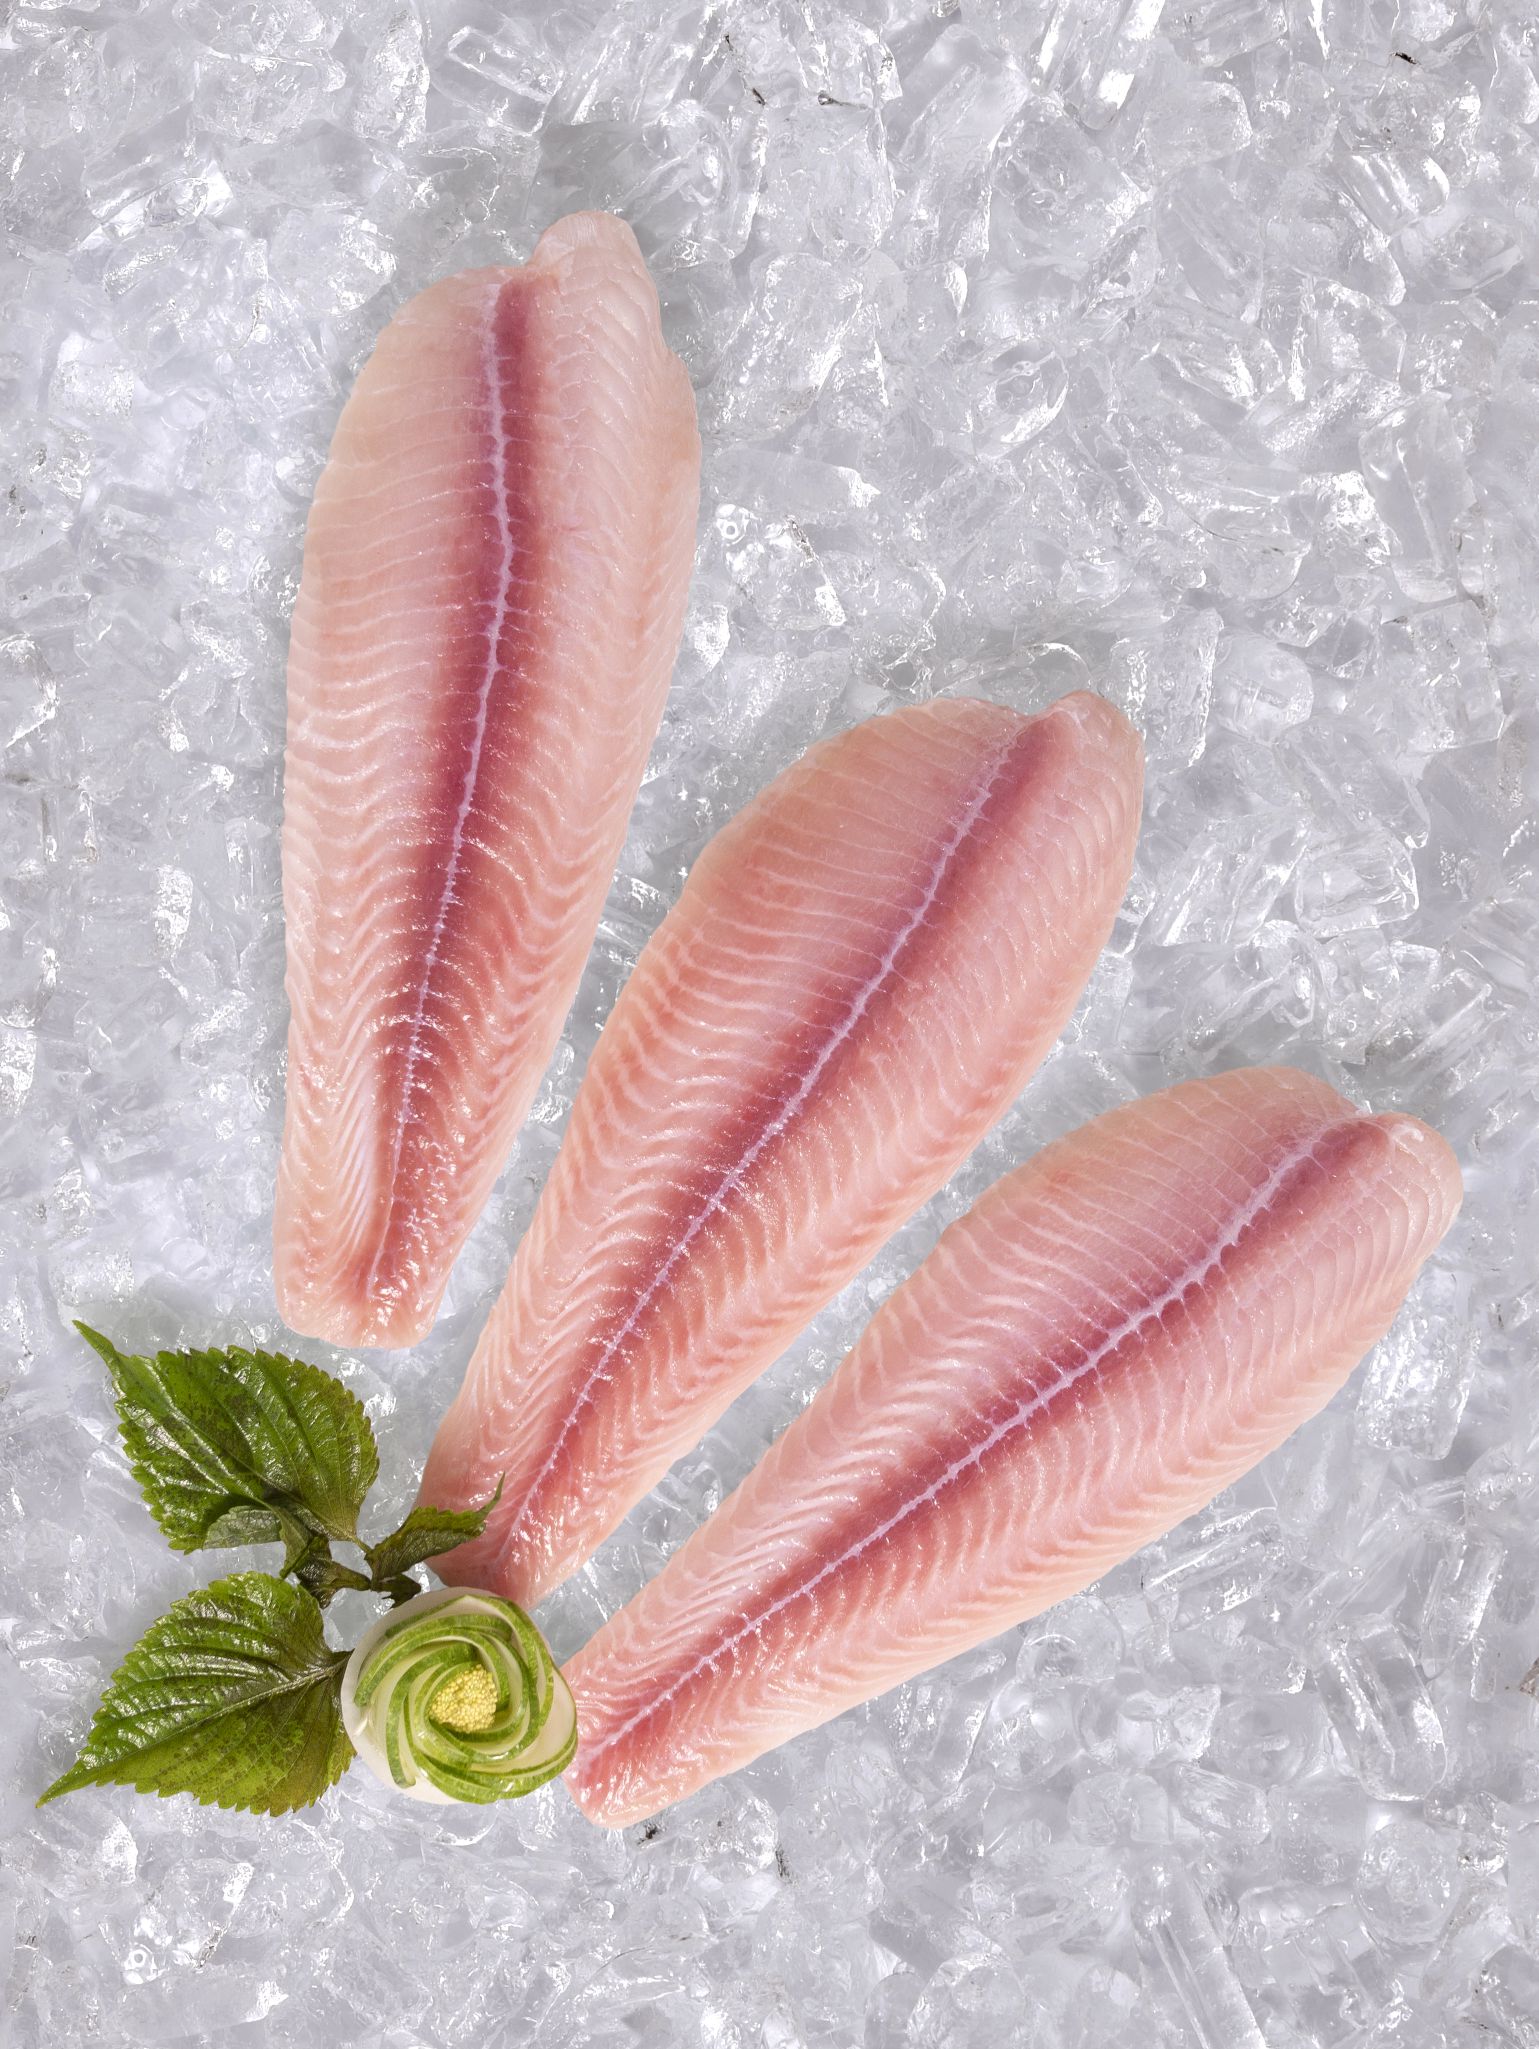 <span  class="uc_style_uc_tiles_grid_image_elementor_uc_items_attribute_title" style="color:#ffffff;">Frozen Pangasius Semi-trimmed</span>